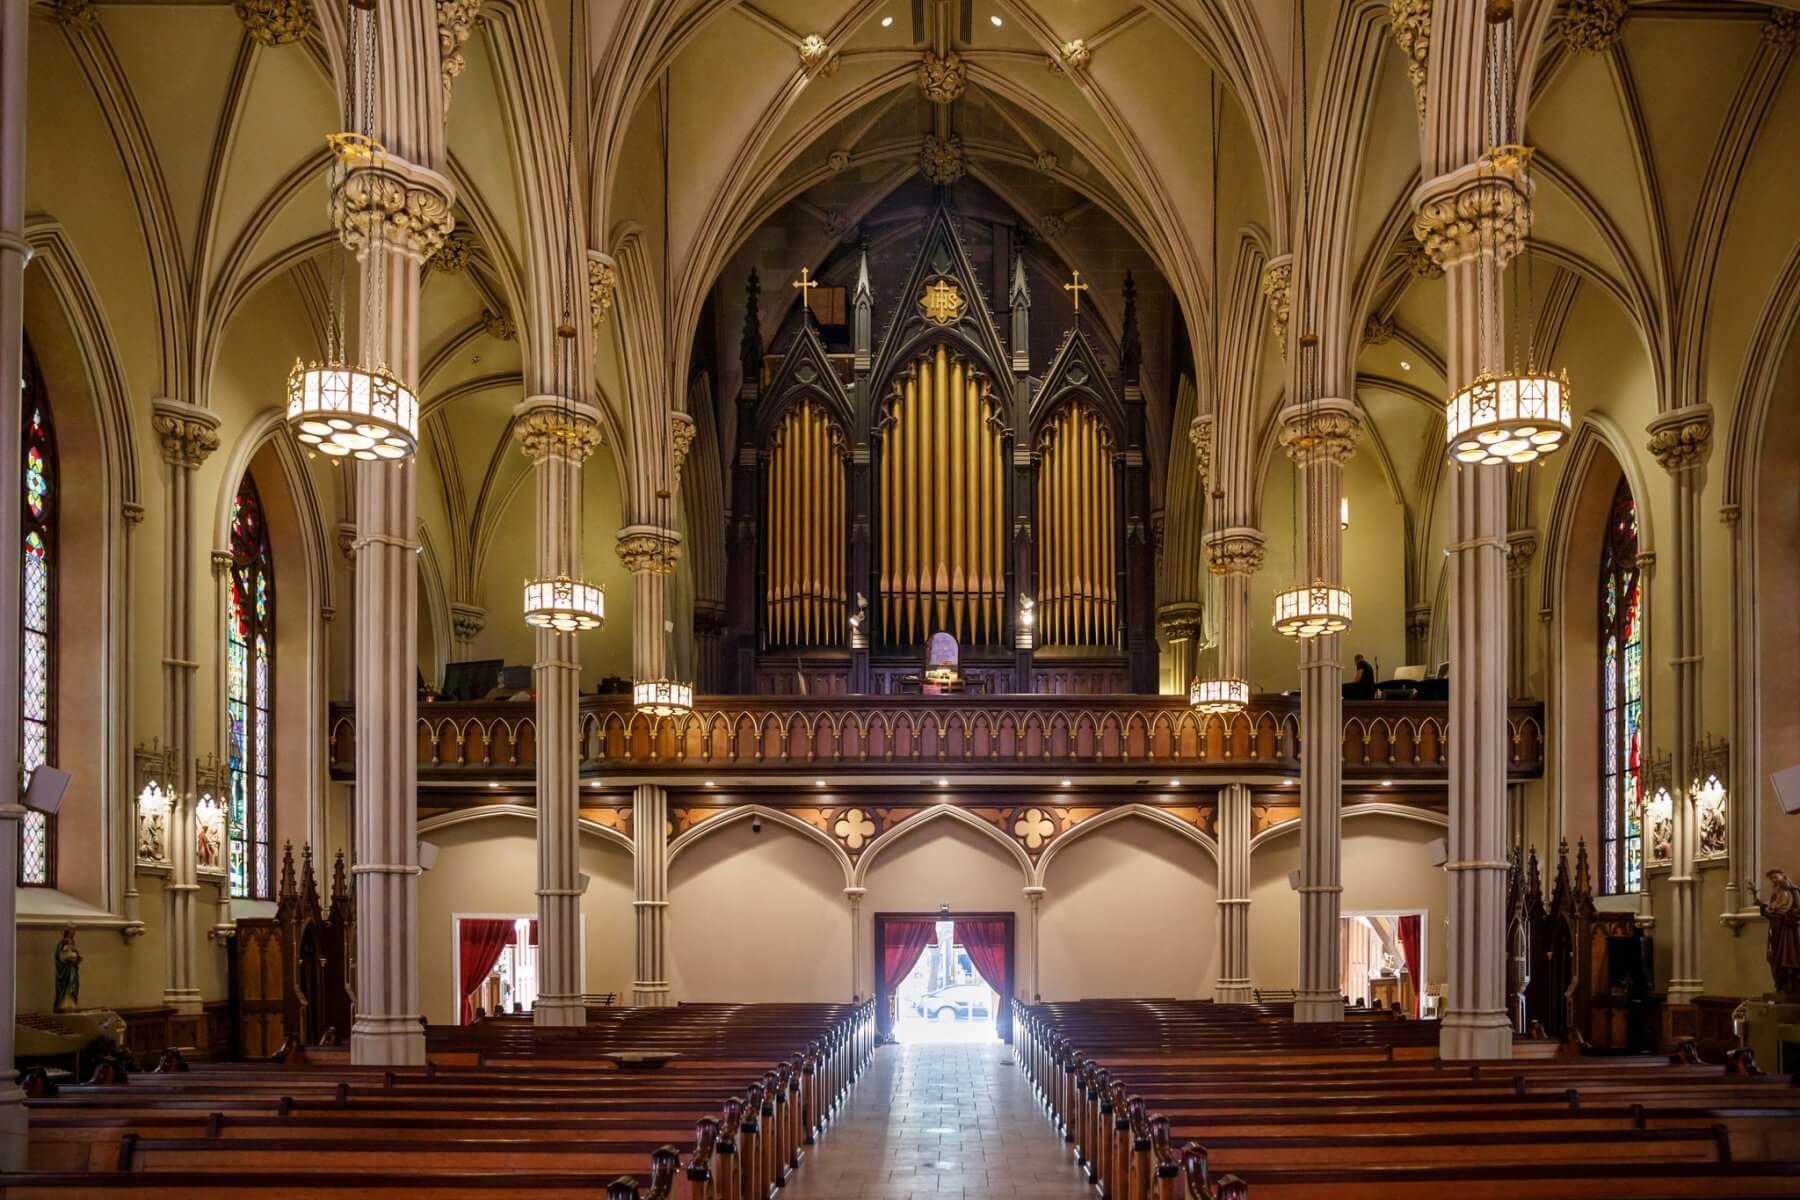 1868 Henry Erben pipe organ. Photo by Stefano Ukmar for The New York Times